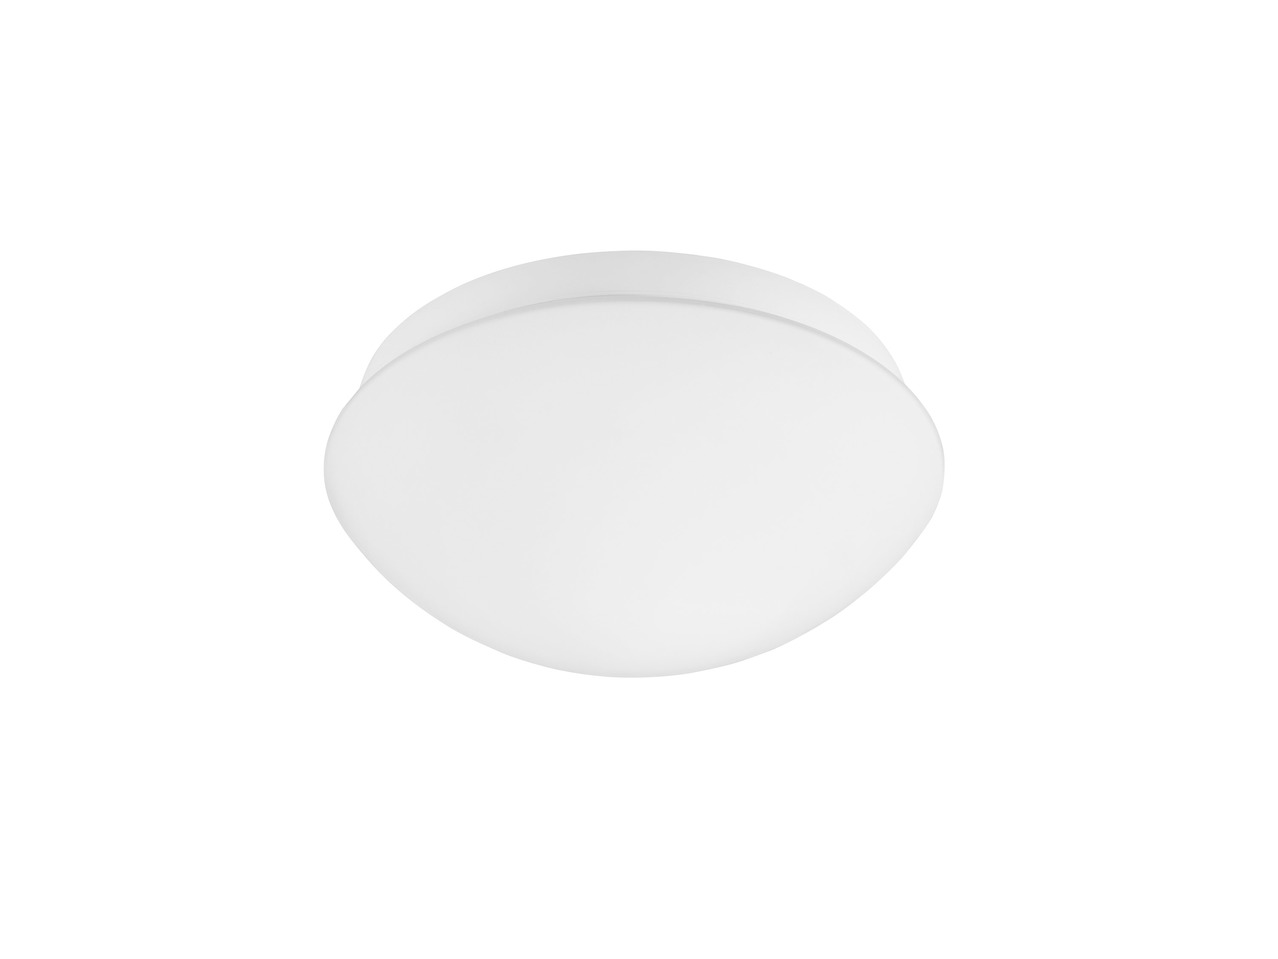 Livarno Lux Ceiling Lamp with Motion Sensor1